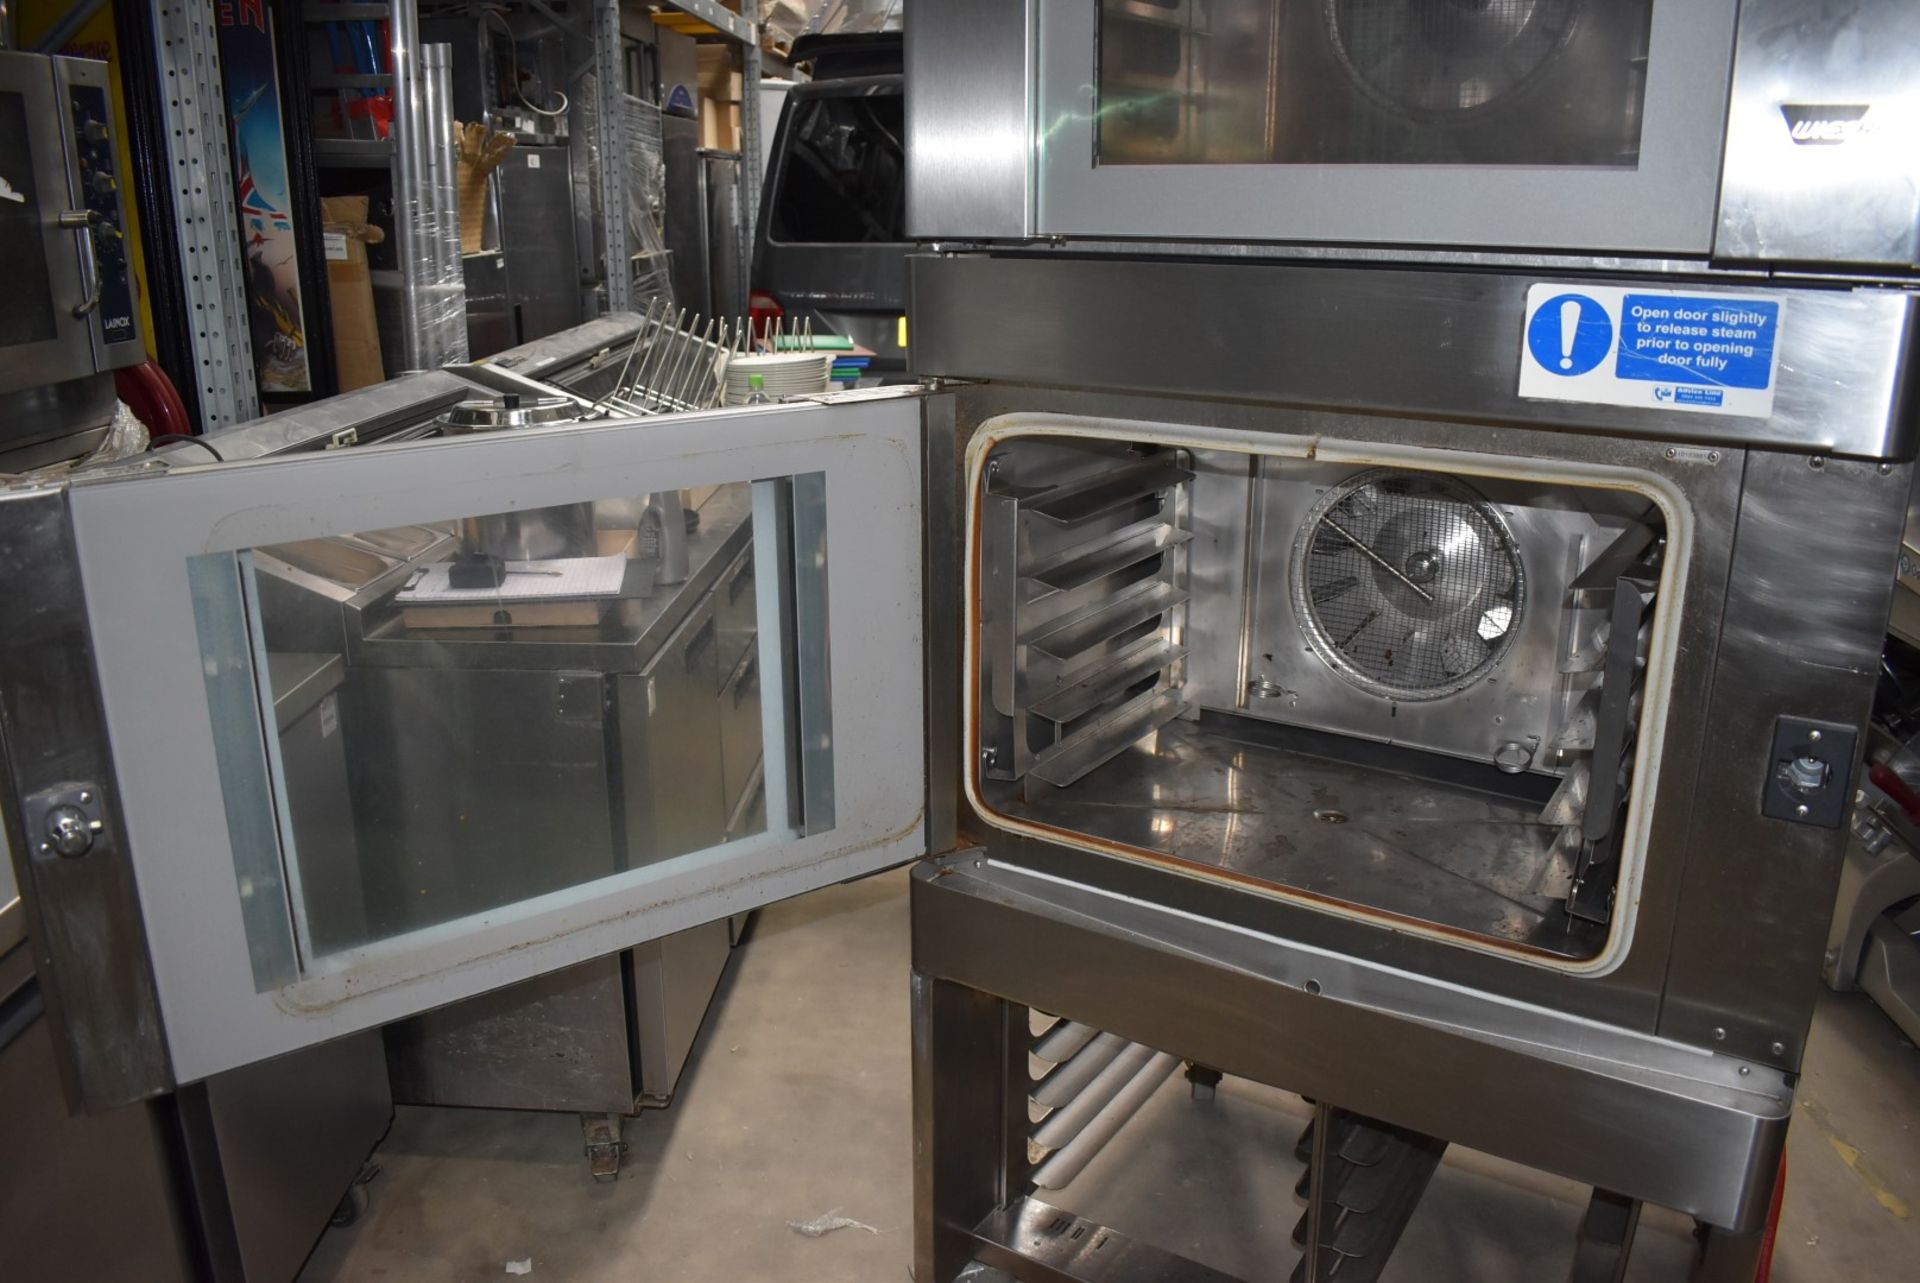 1 x Wiesheu B4-E2 Duo Commercial Convection Oven With Stainless Steel Exterior - Image 7 of 12